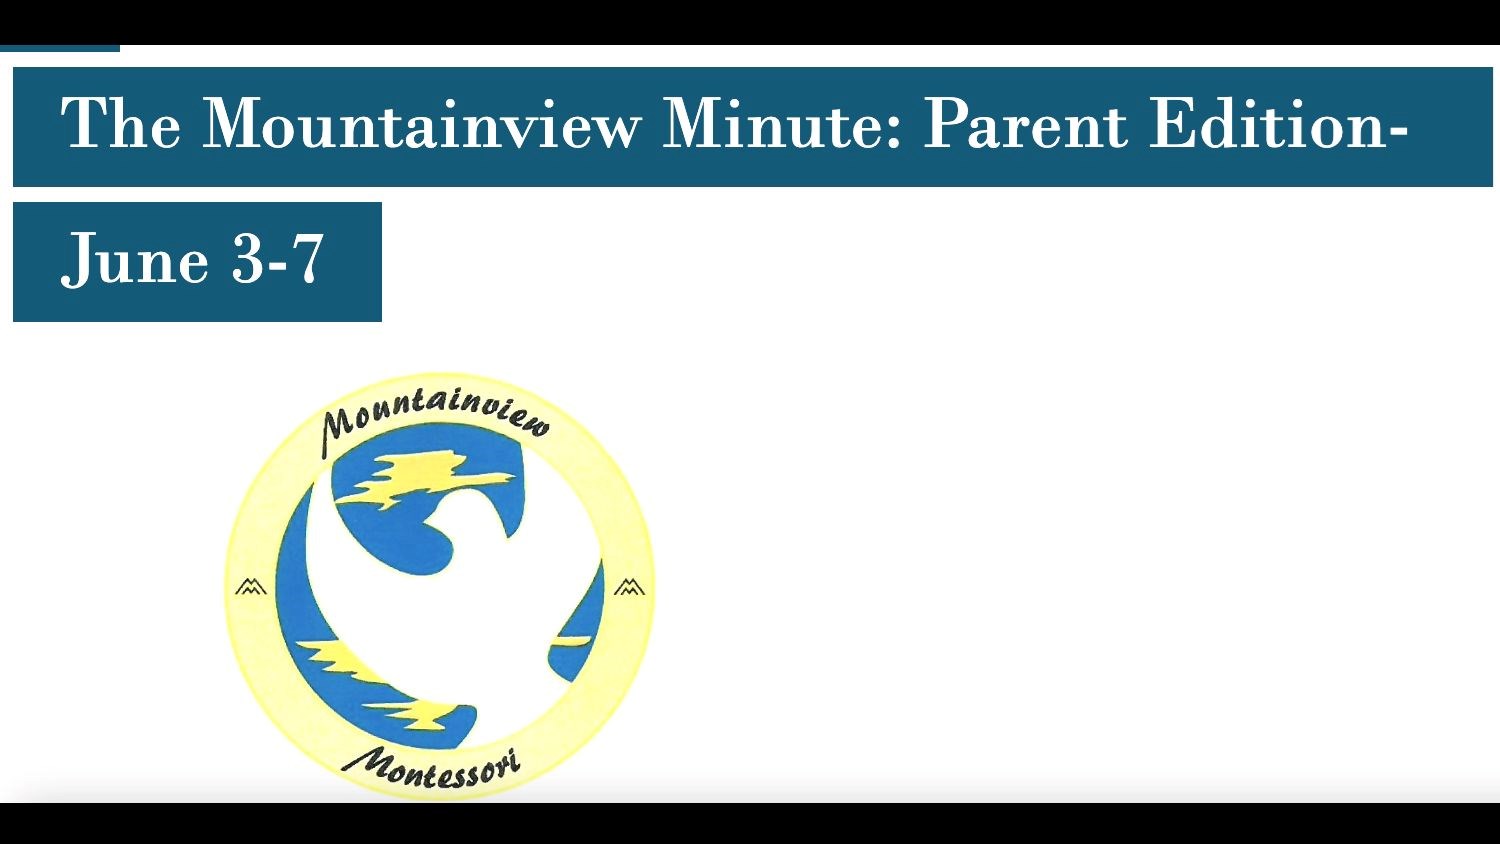 The Mountainview Minute: June 3-7